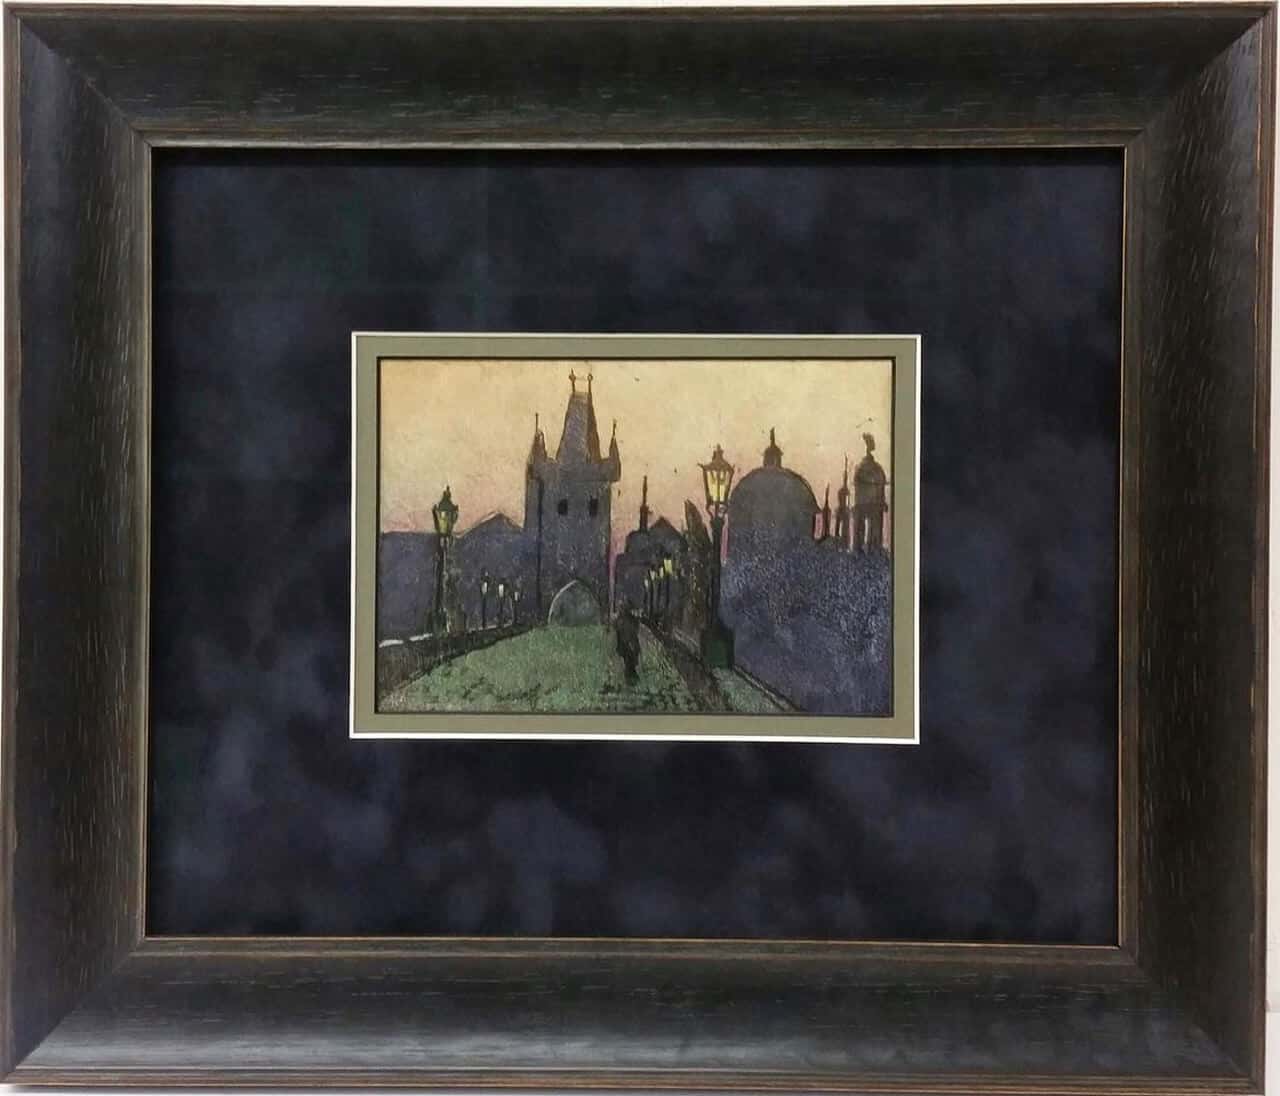 A framed painting of the charles bridge in prague.